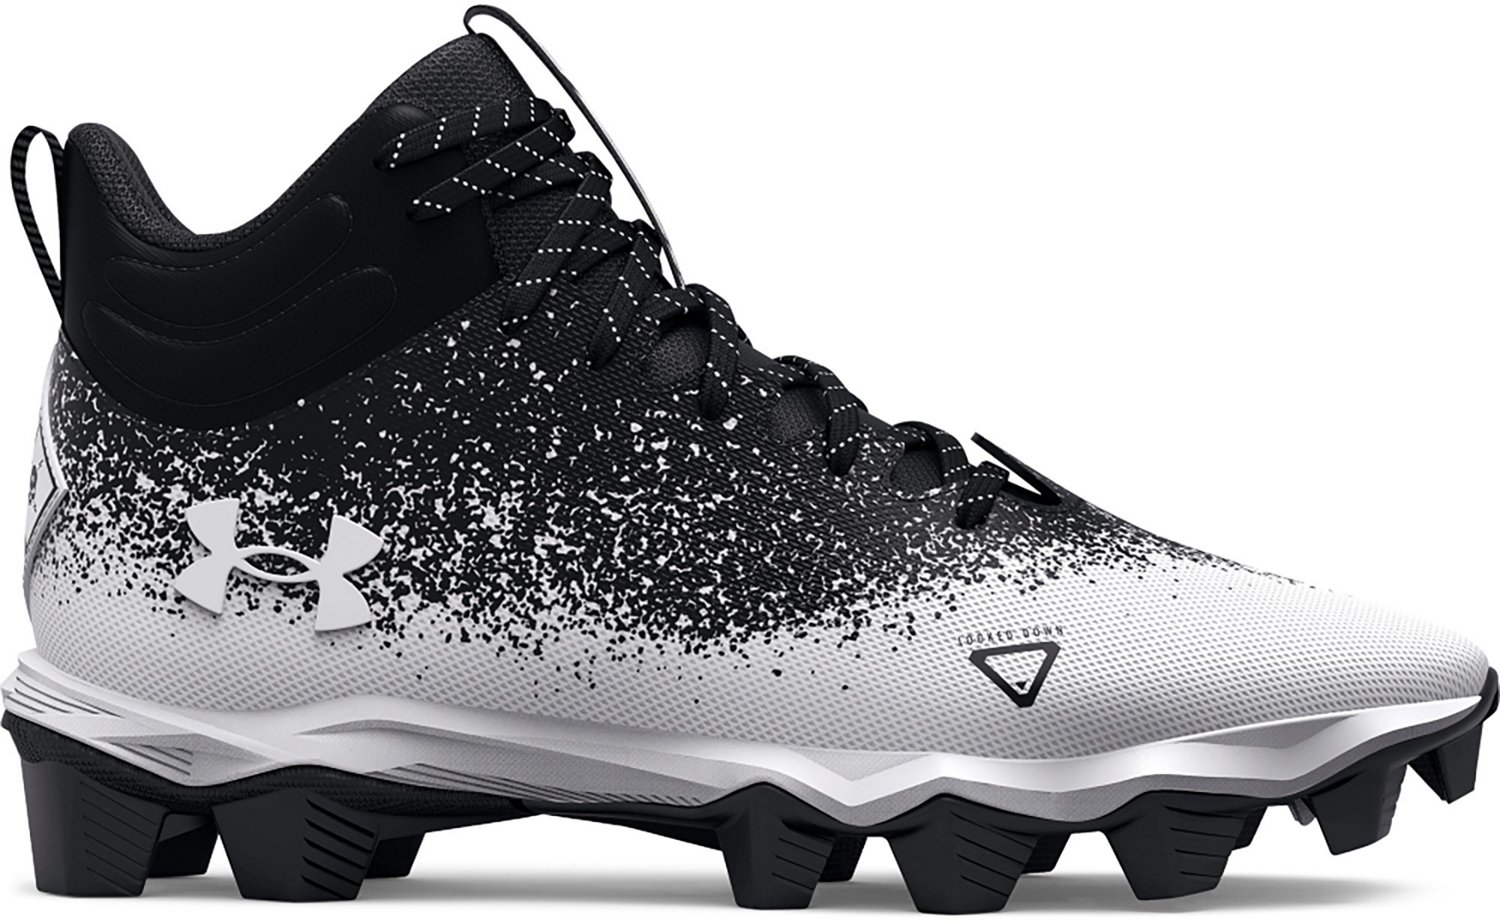 Under Armour Shoes | Academy